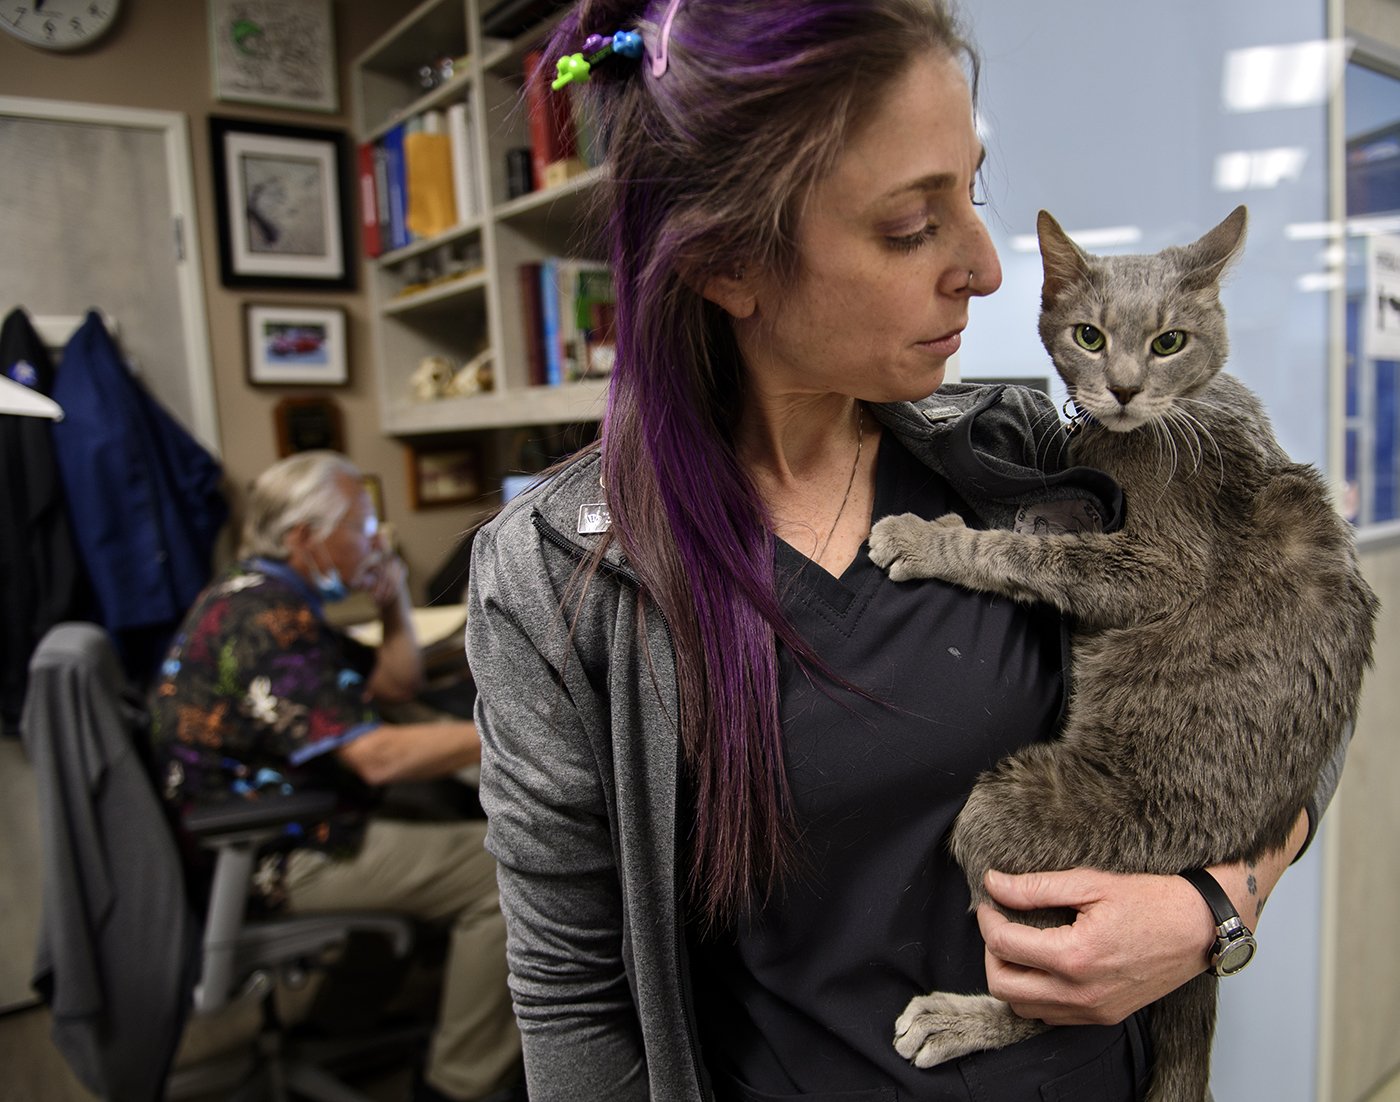  Vet tech Lauren Genger holds Butters, her sweet-tempered cat on Monday, March 1, 2021 at Serrano Animal Hospital. Butters served as a therapy pet, giving “hugs” to staff members in need. He died a few weeks after this photo was taken, sending Genger